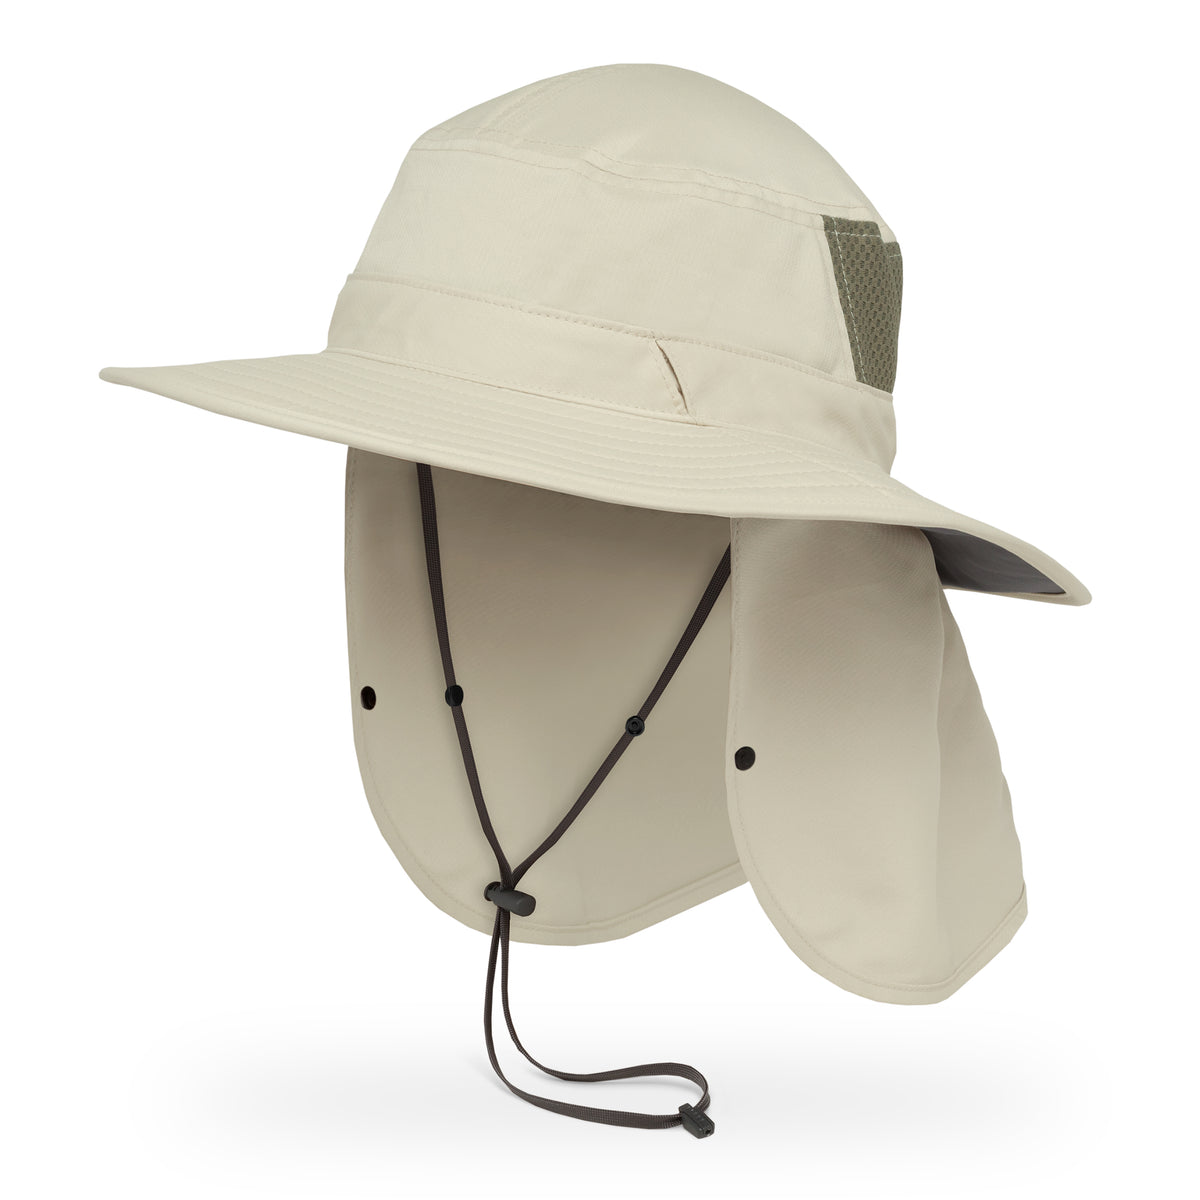 Sunday Afternoons Backdrop Boonie Hat - Sandstone